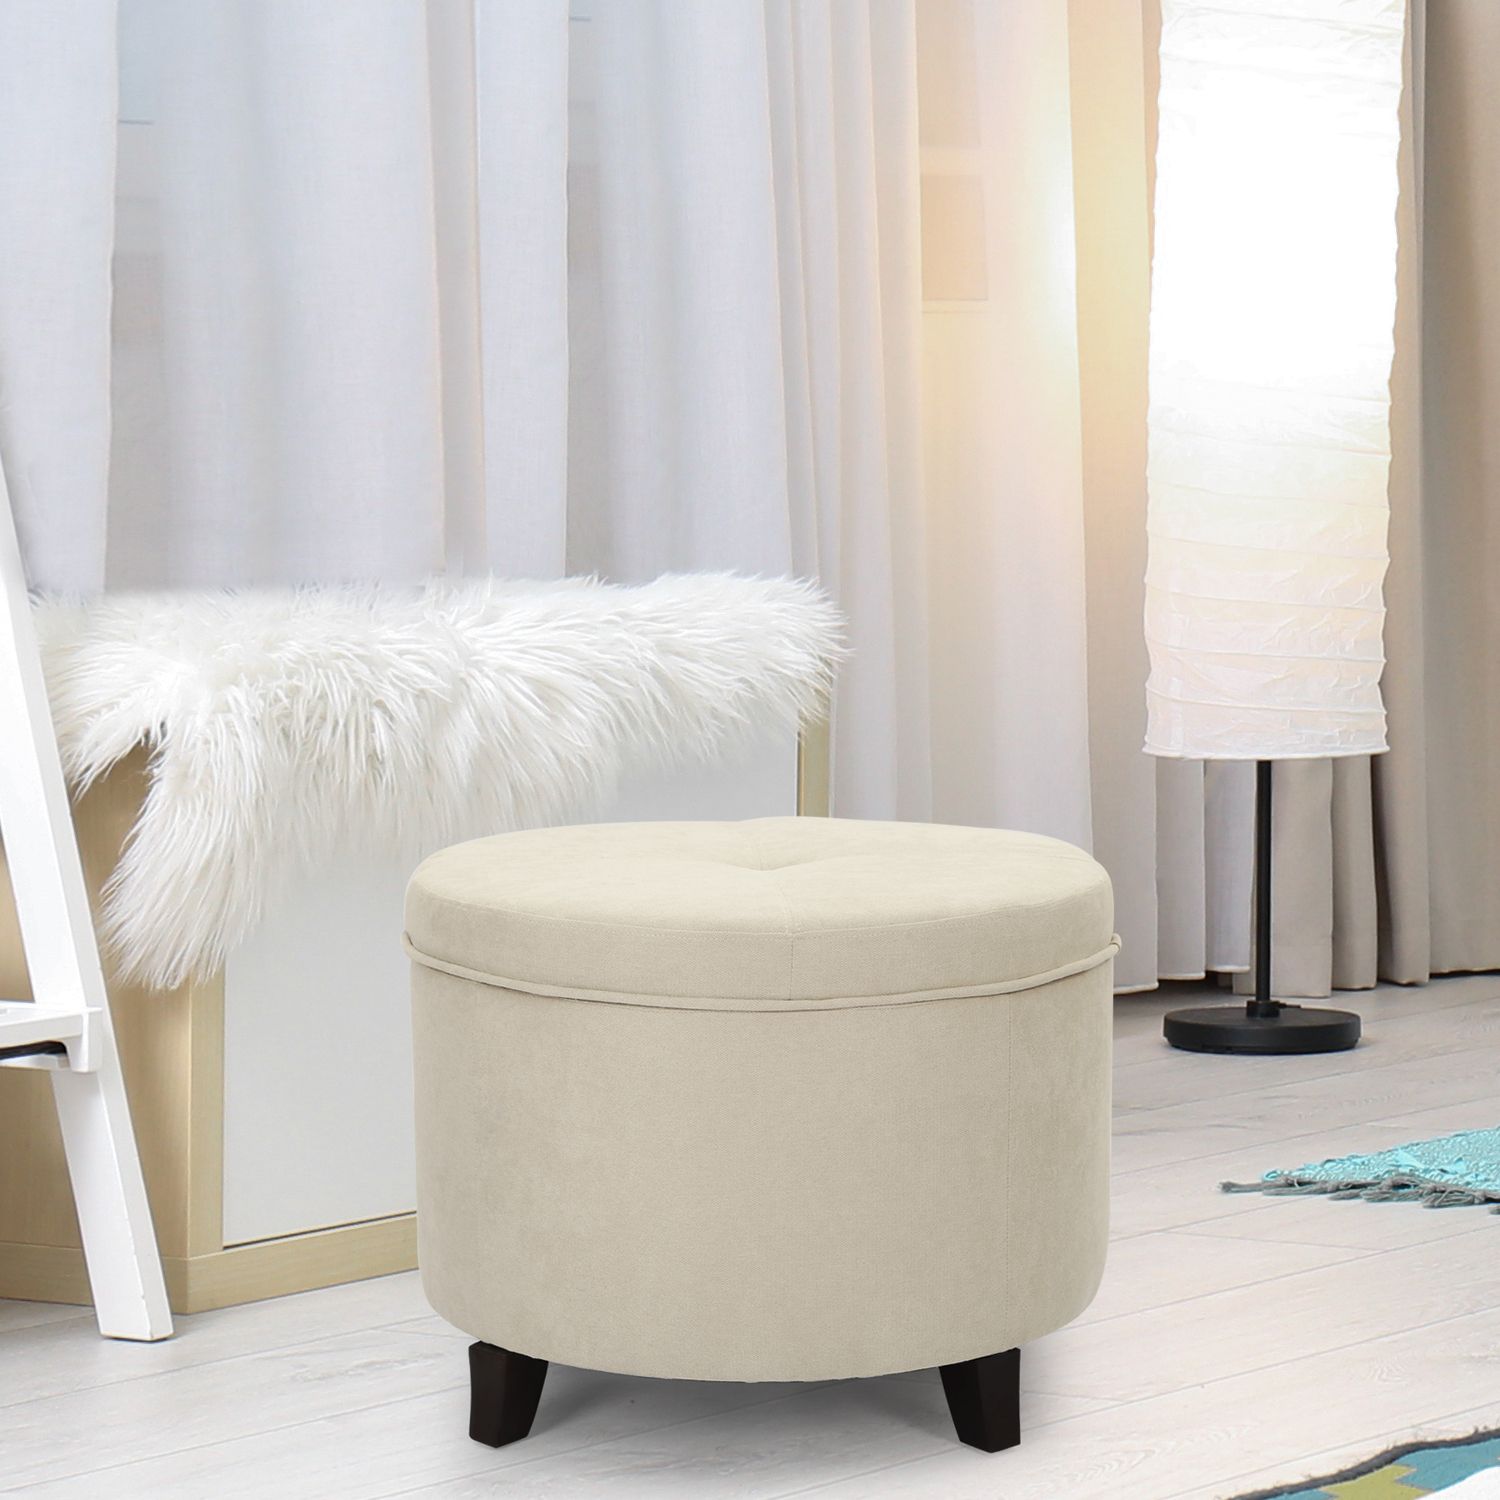 Joveco Round Storage Ottoman Footrest, Button Tufted Fabric Footstool With Regard To Cream Fabric Tufted Round Storage Ottomans (View 6 of 20)